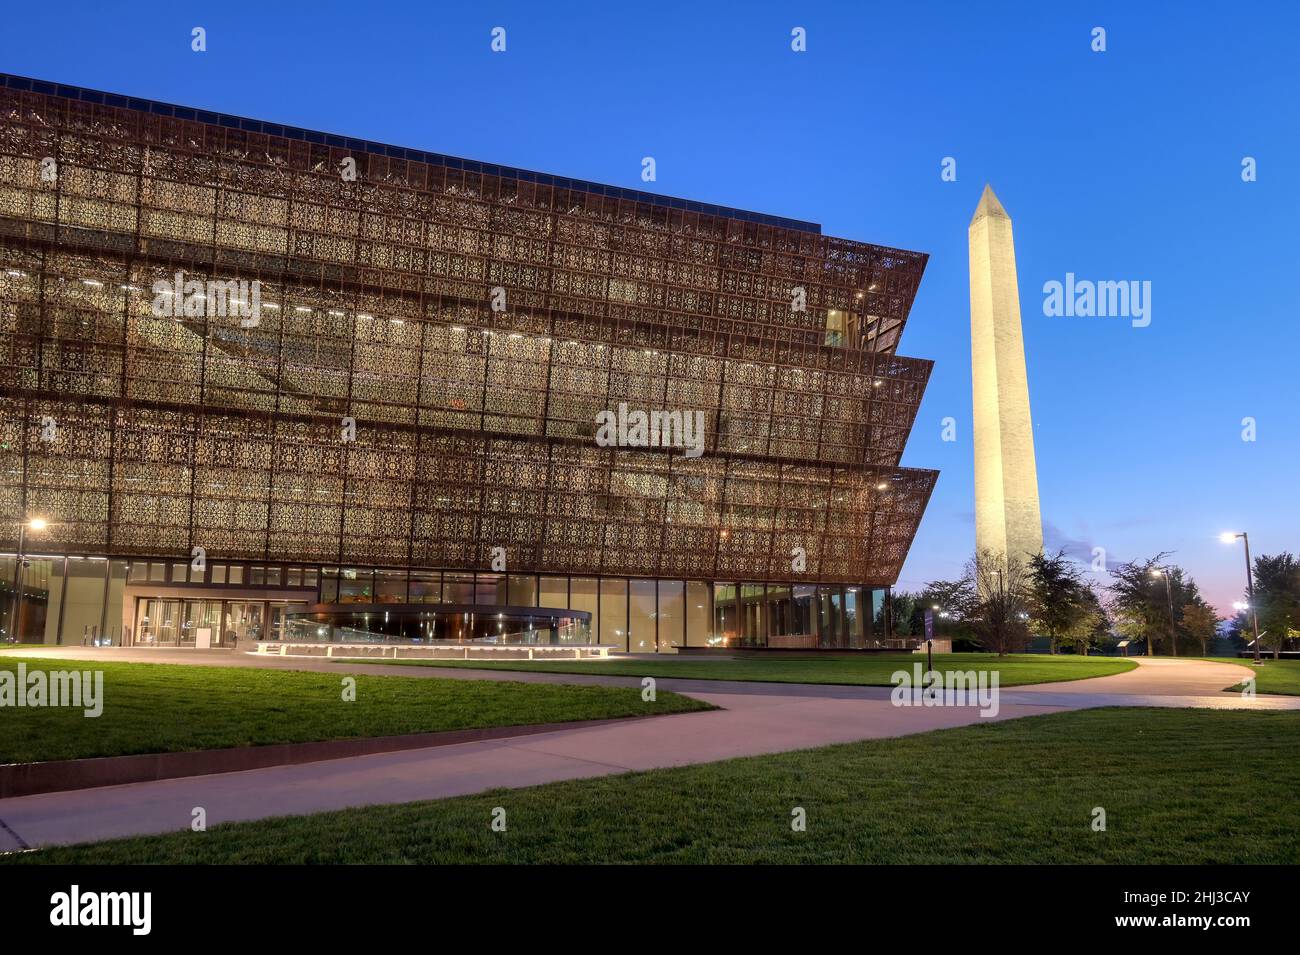 Washington, D.C. - October 13th, 2021: The Washington Monument and The Smithsonian's National Museum of African American History and Culture on the Na Stock Photo